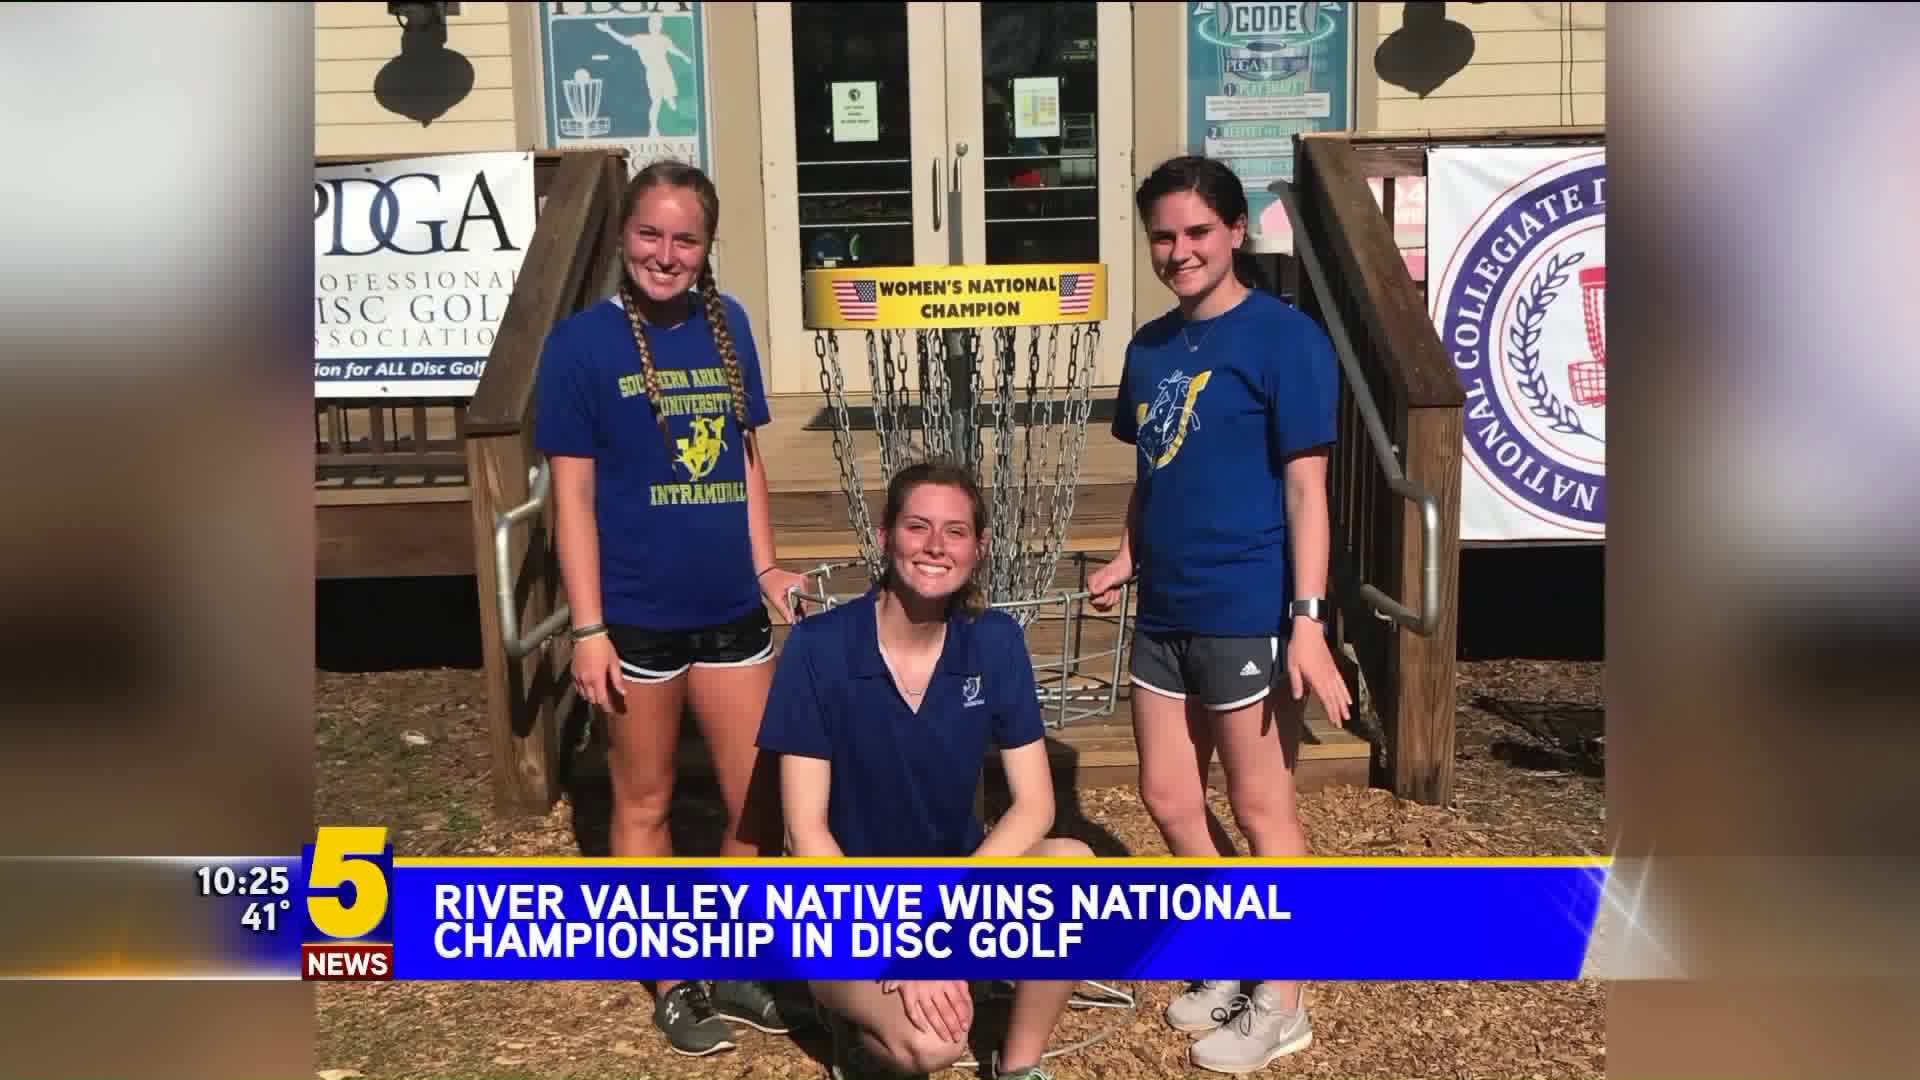 RIVER VALLEY NATIVE WINS NATIONAL CHAMPIONSHIP IN DISC GOLF